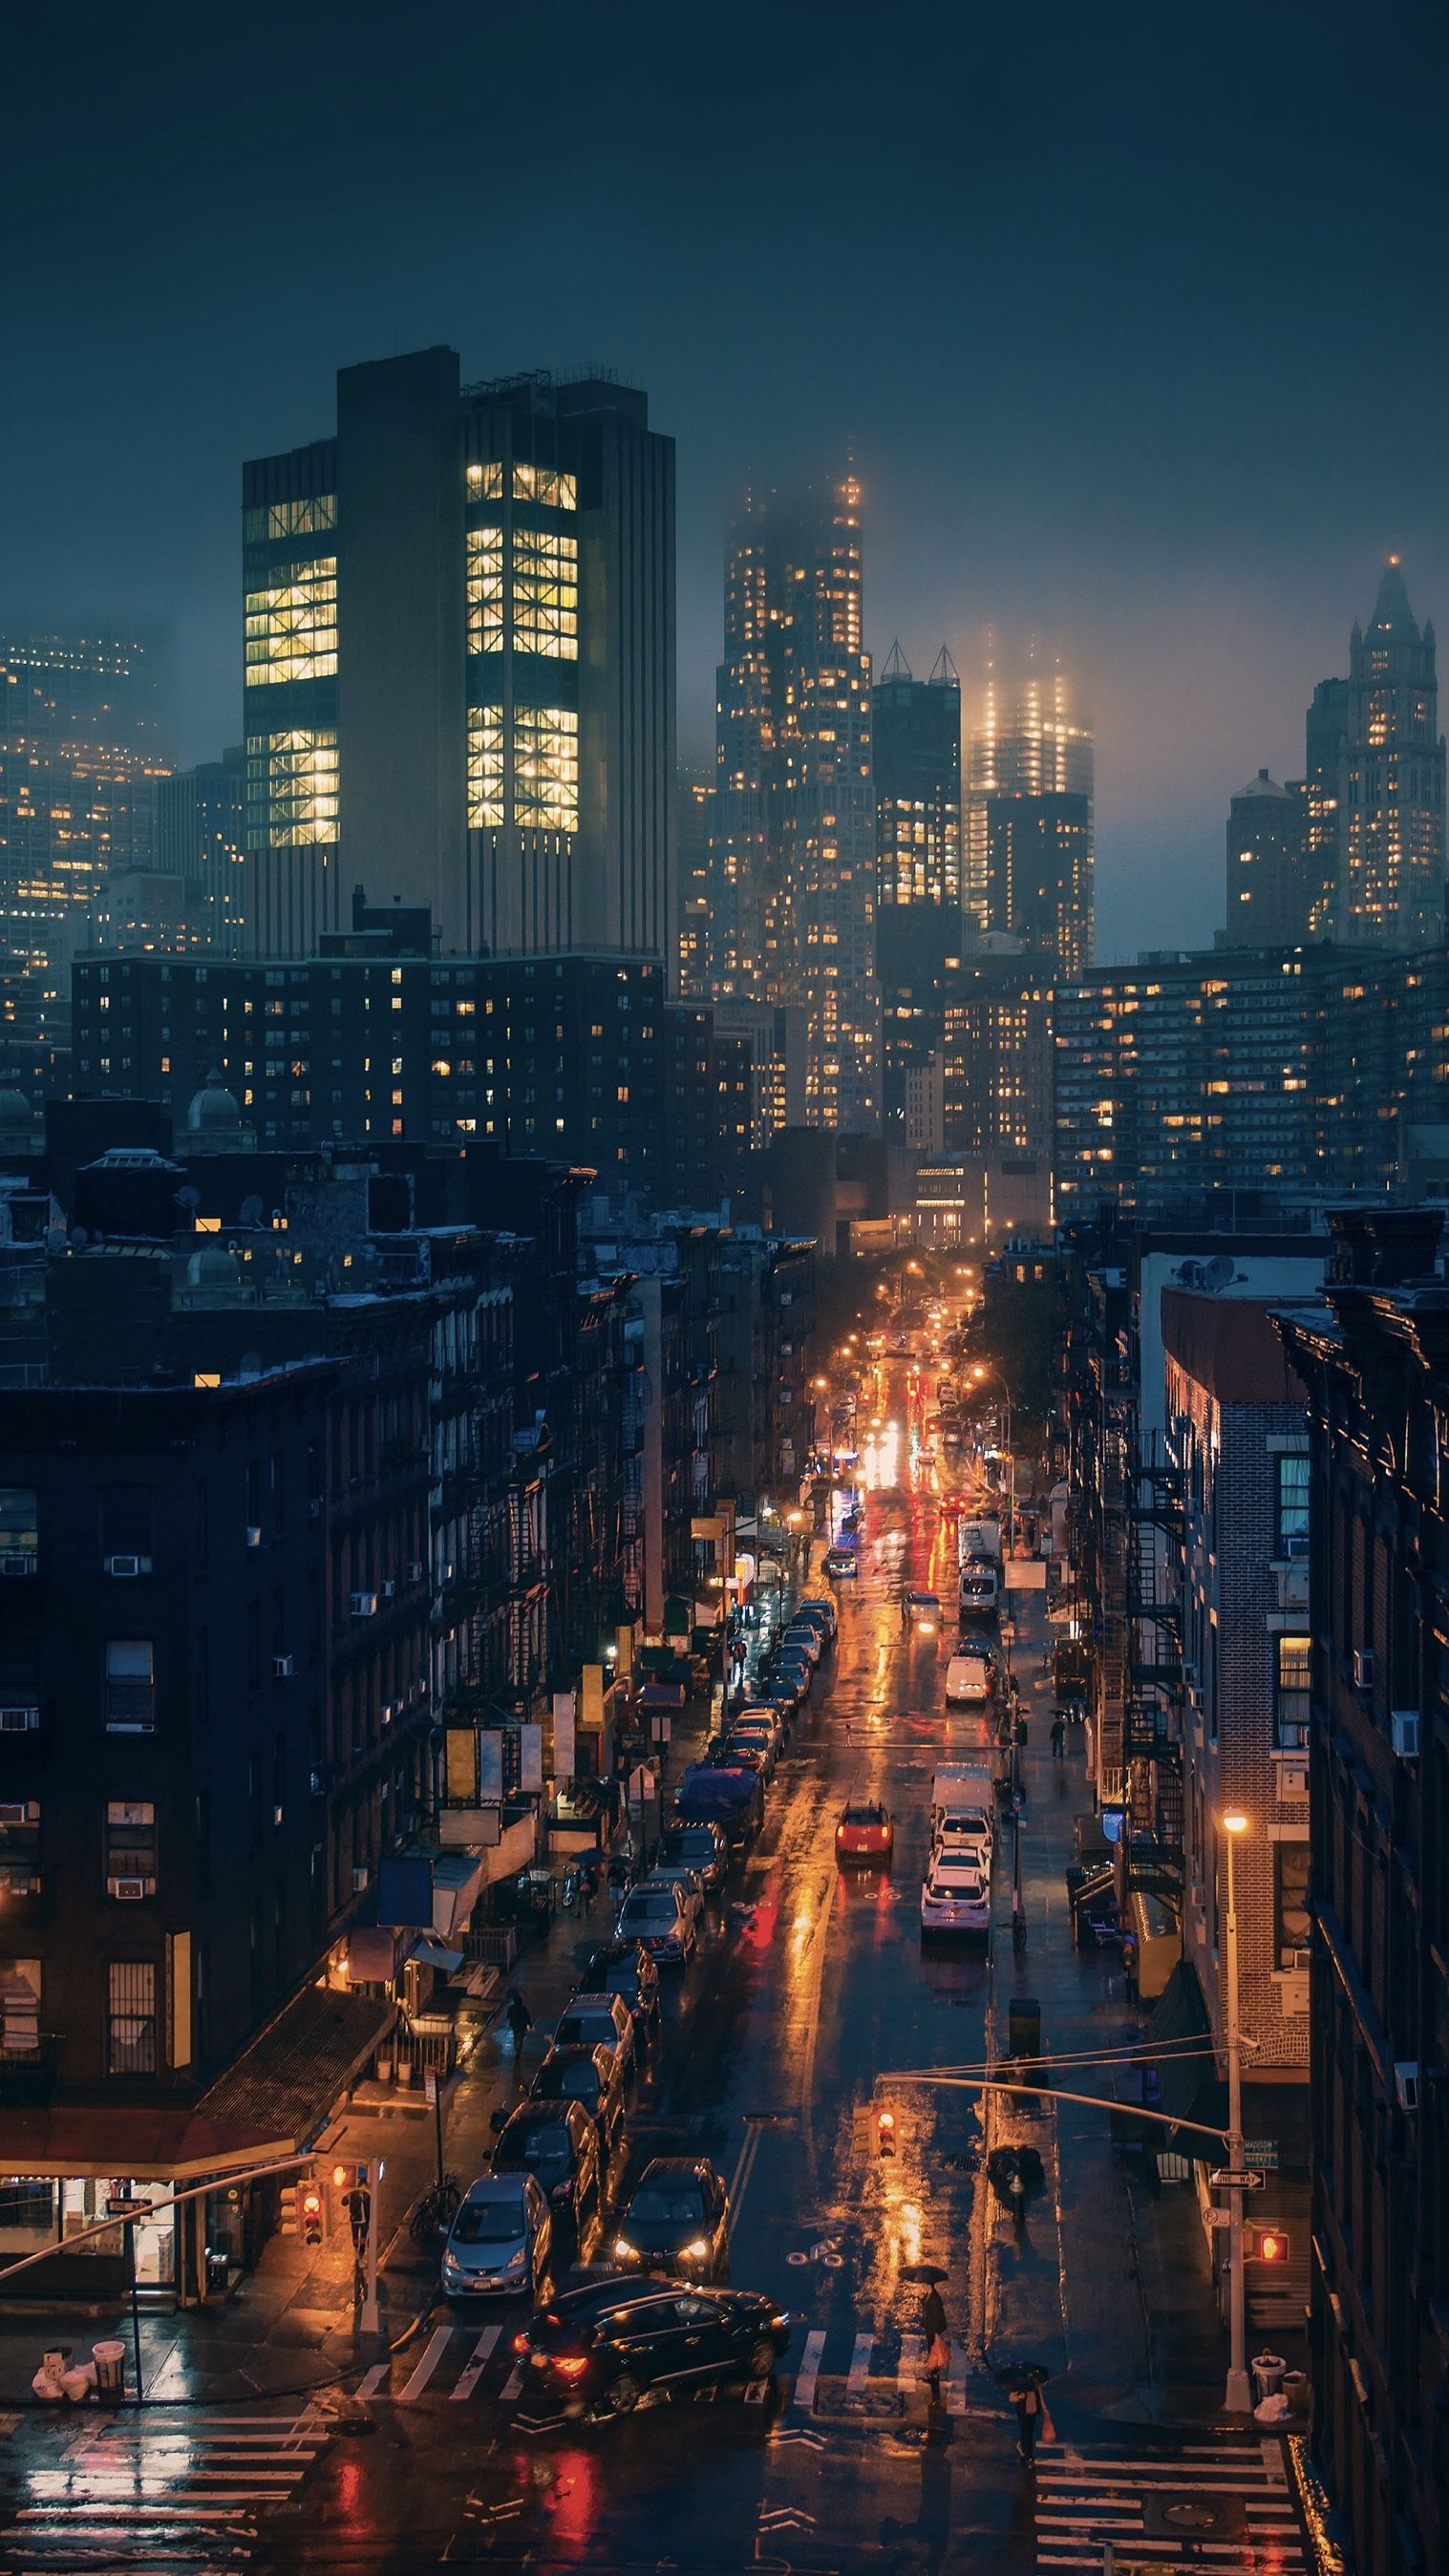 A city street at night with tall buildings lit up in the background - City